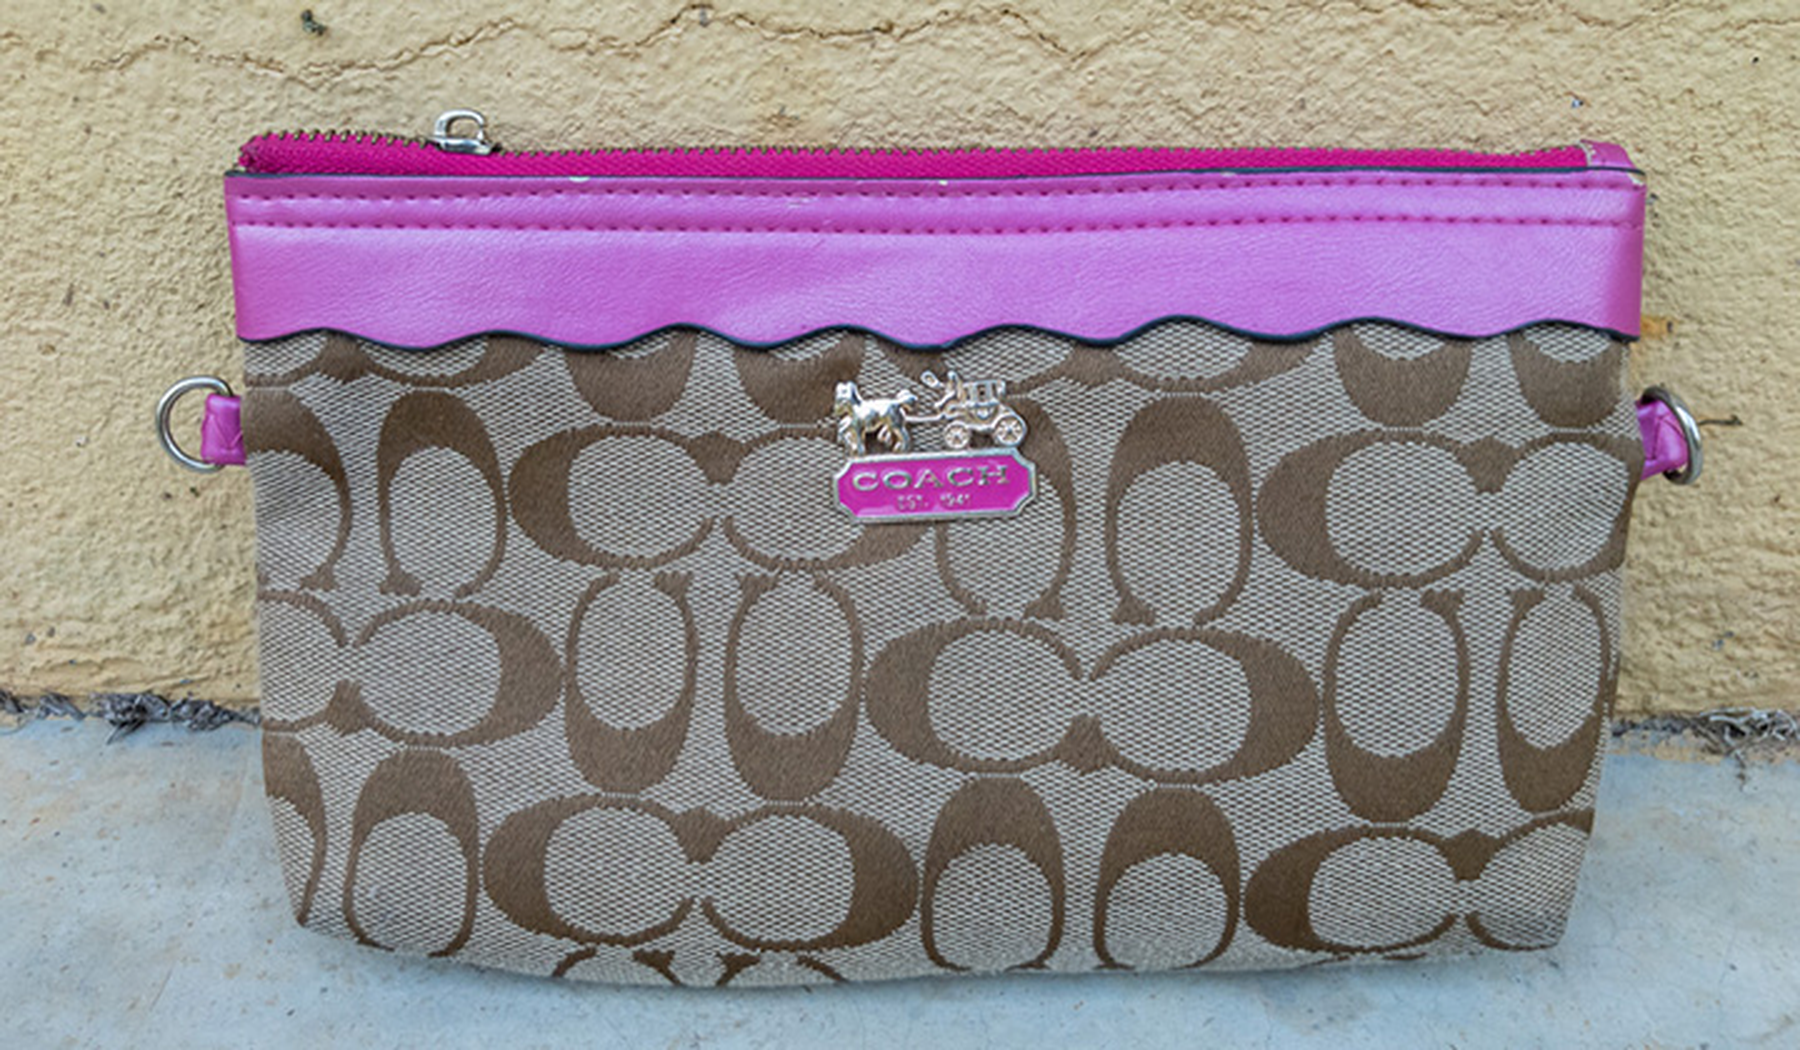 Coach purse with pink leather